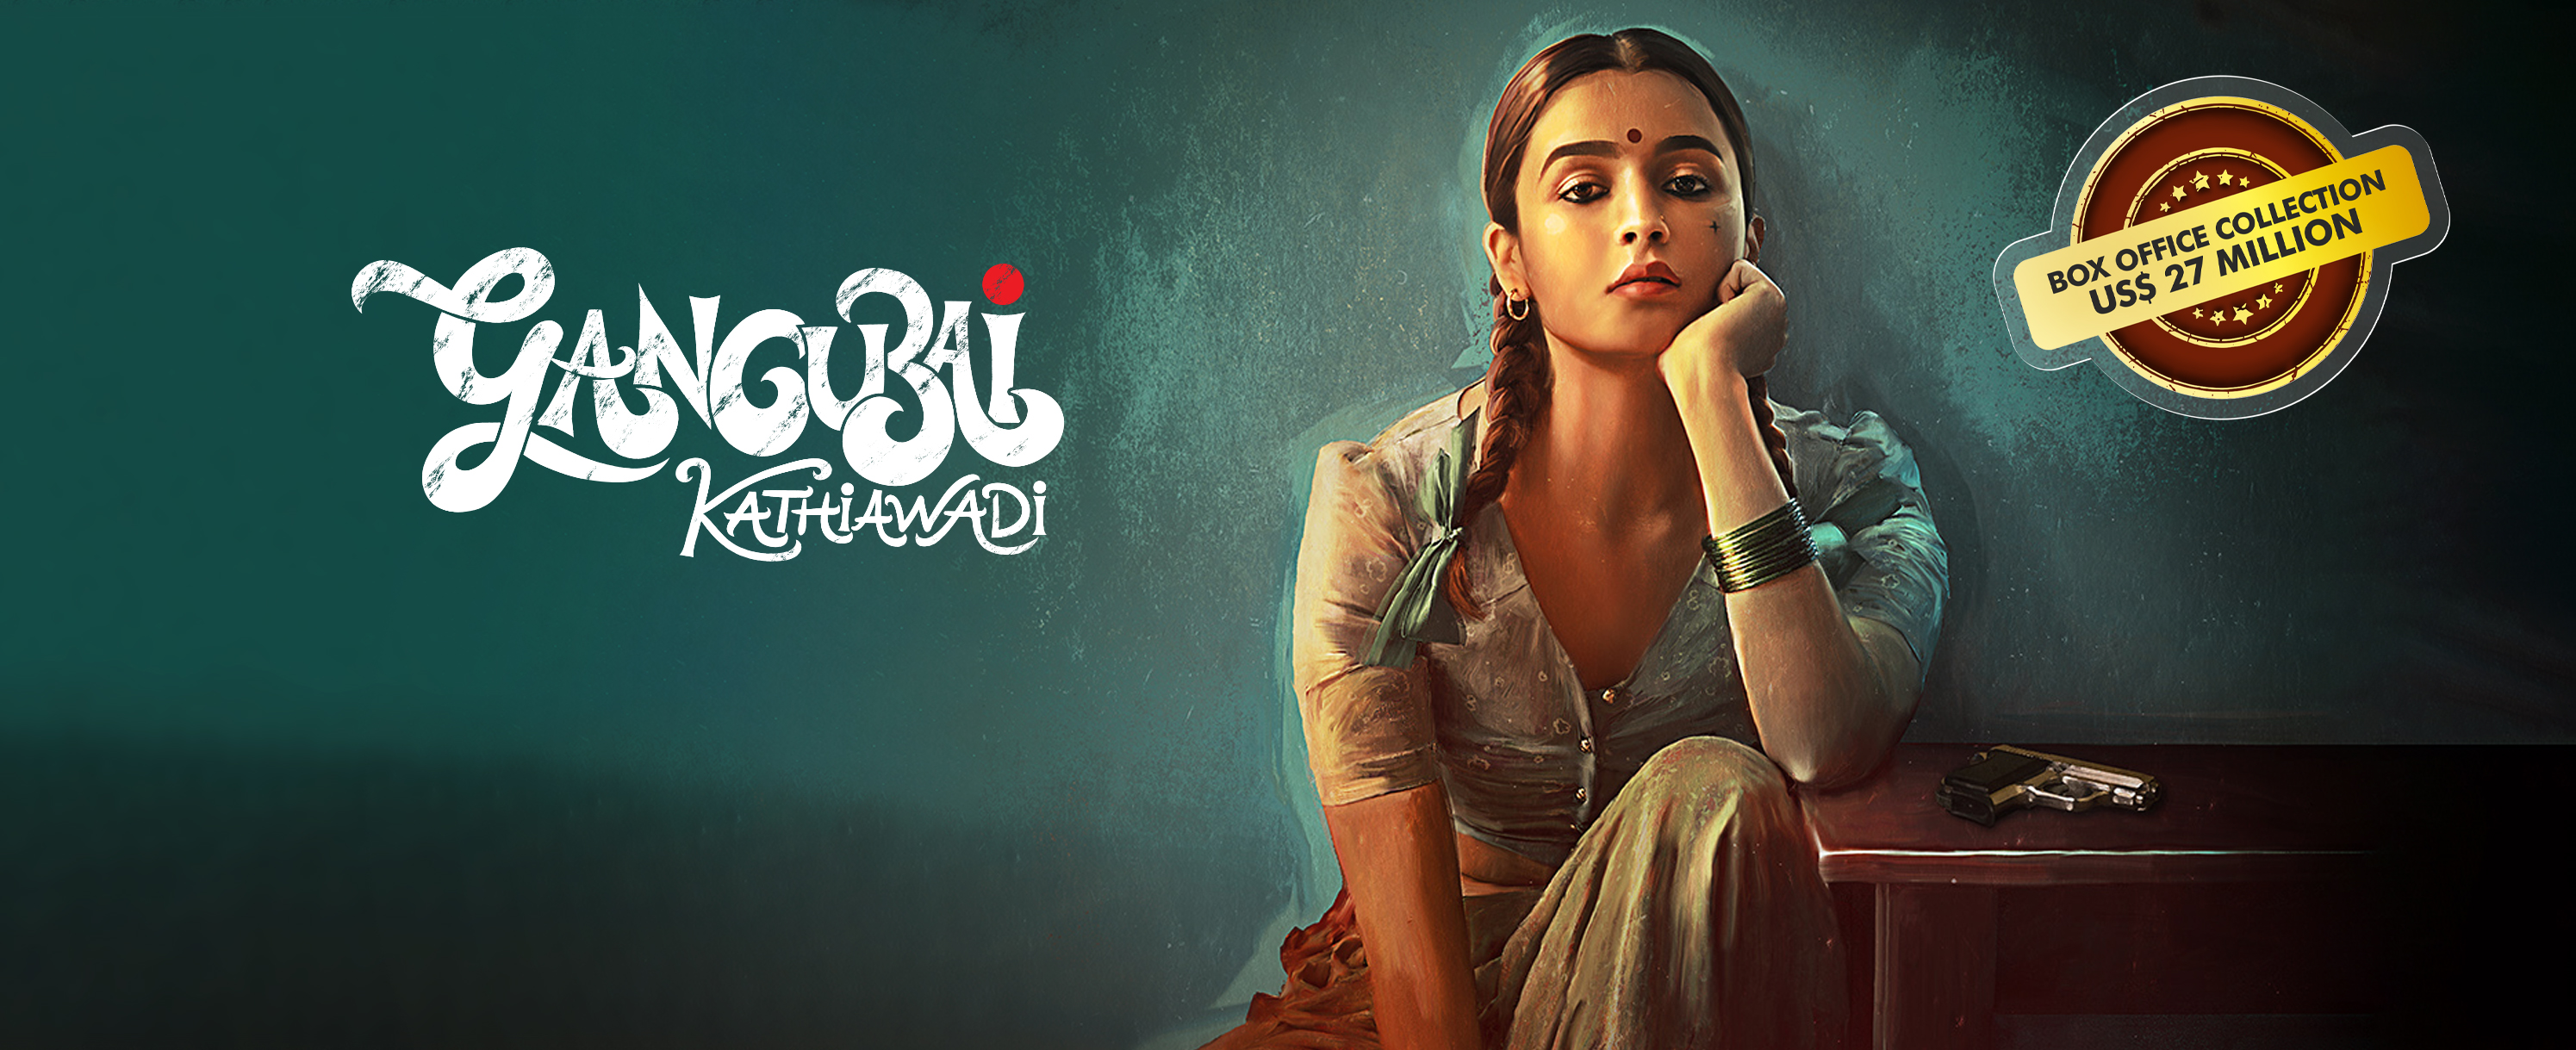 Mithai is a girl full of life, while Siddhartha is serious, intelligent, and self-centred guy. This culturally rich story revolves around traditional Bengali sweets and love which binds them together.